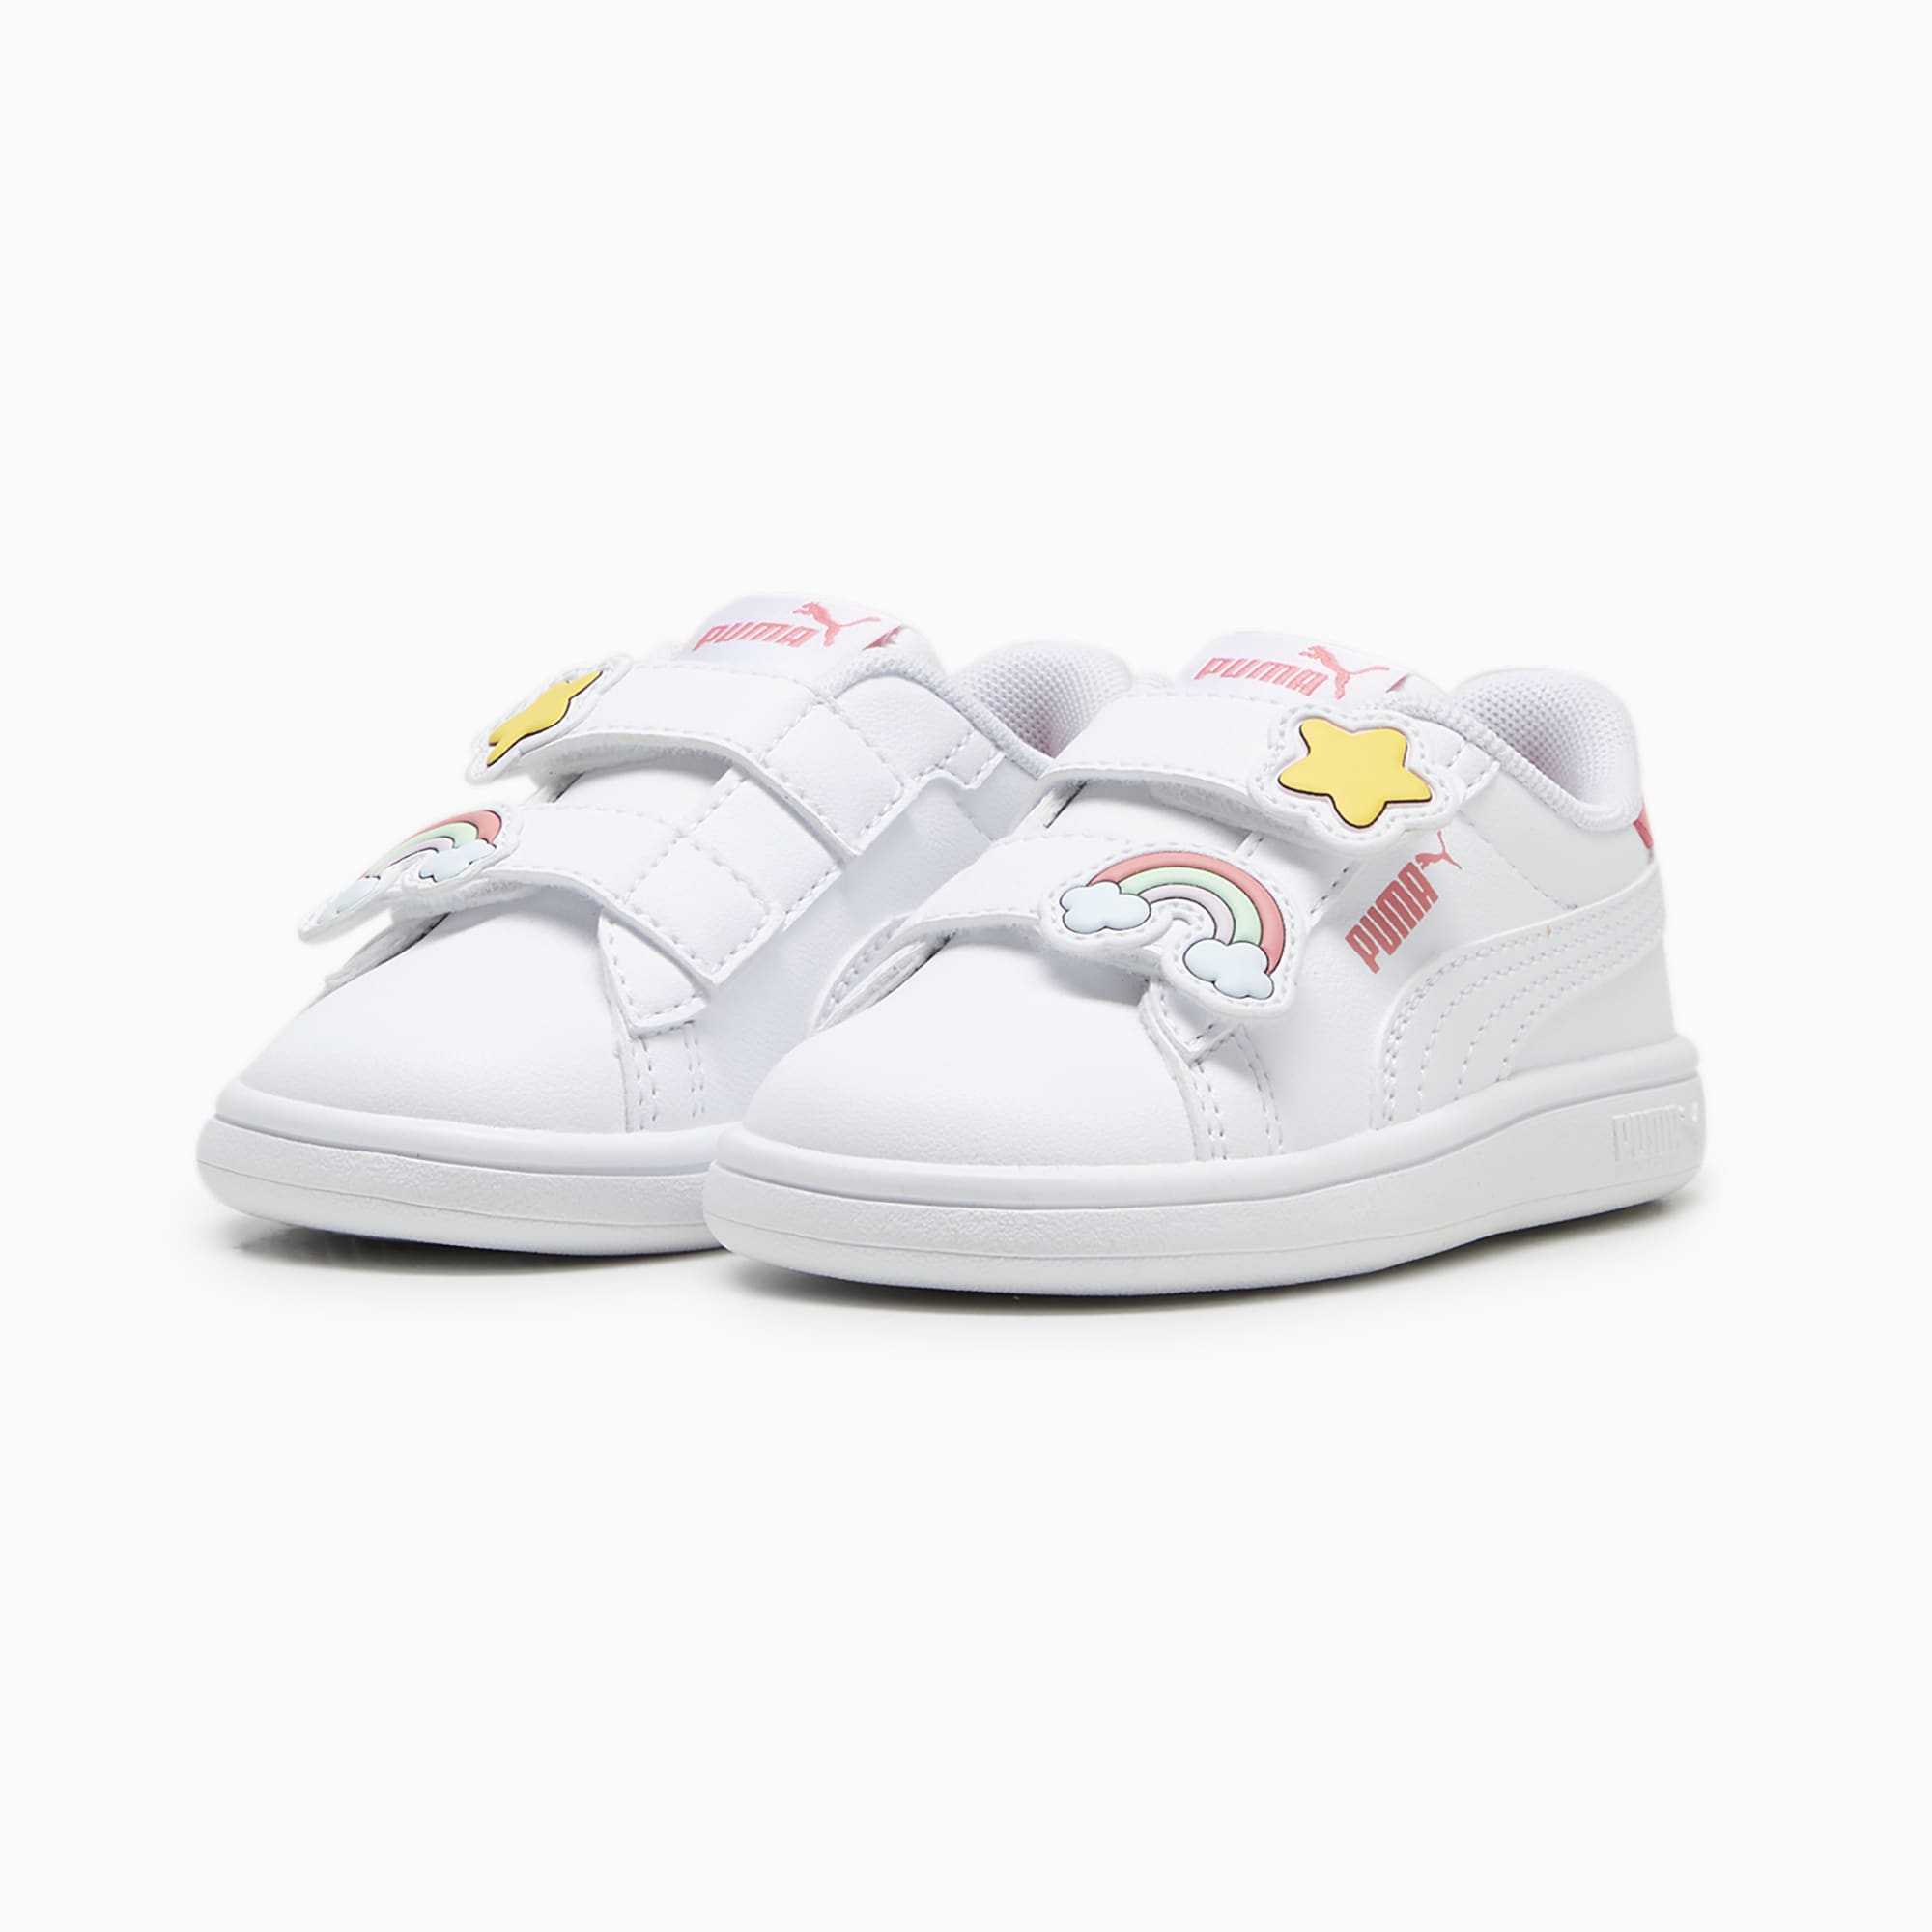 PUMA Smash 3.0 Badges Toddlers' Sneakers, White/Passionfruit, Size 19, Shoes